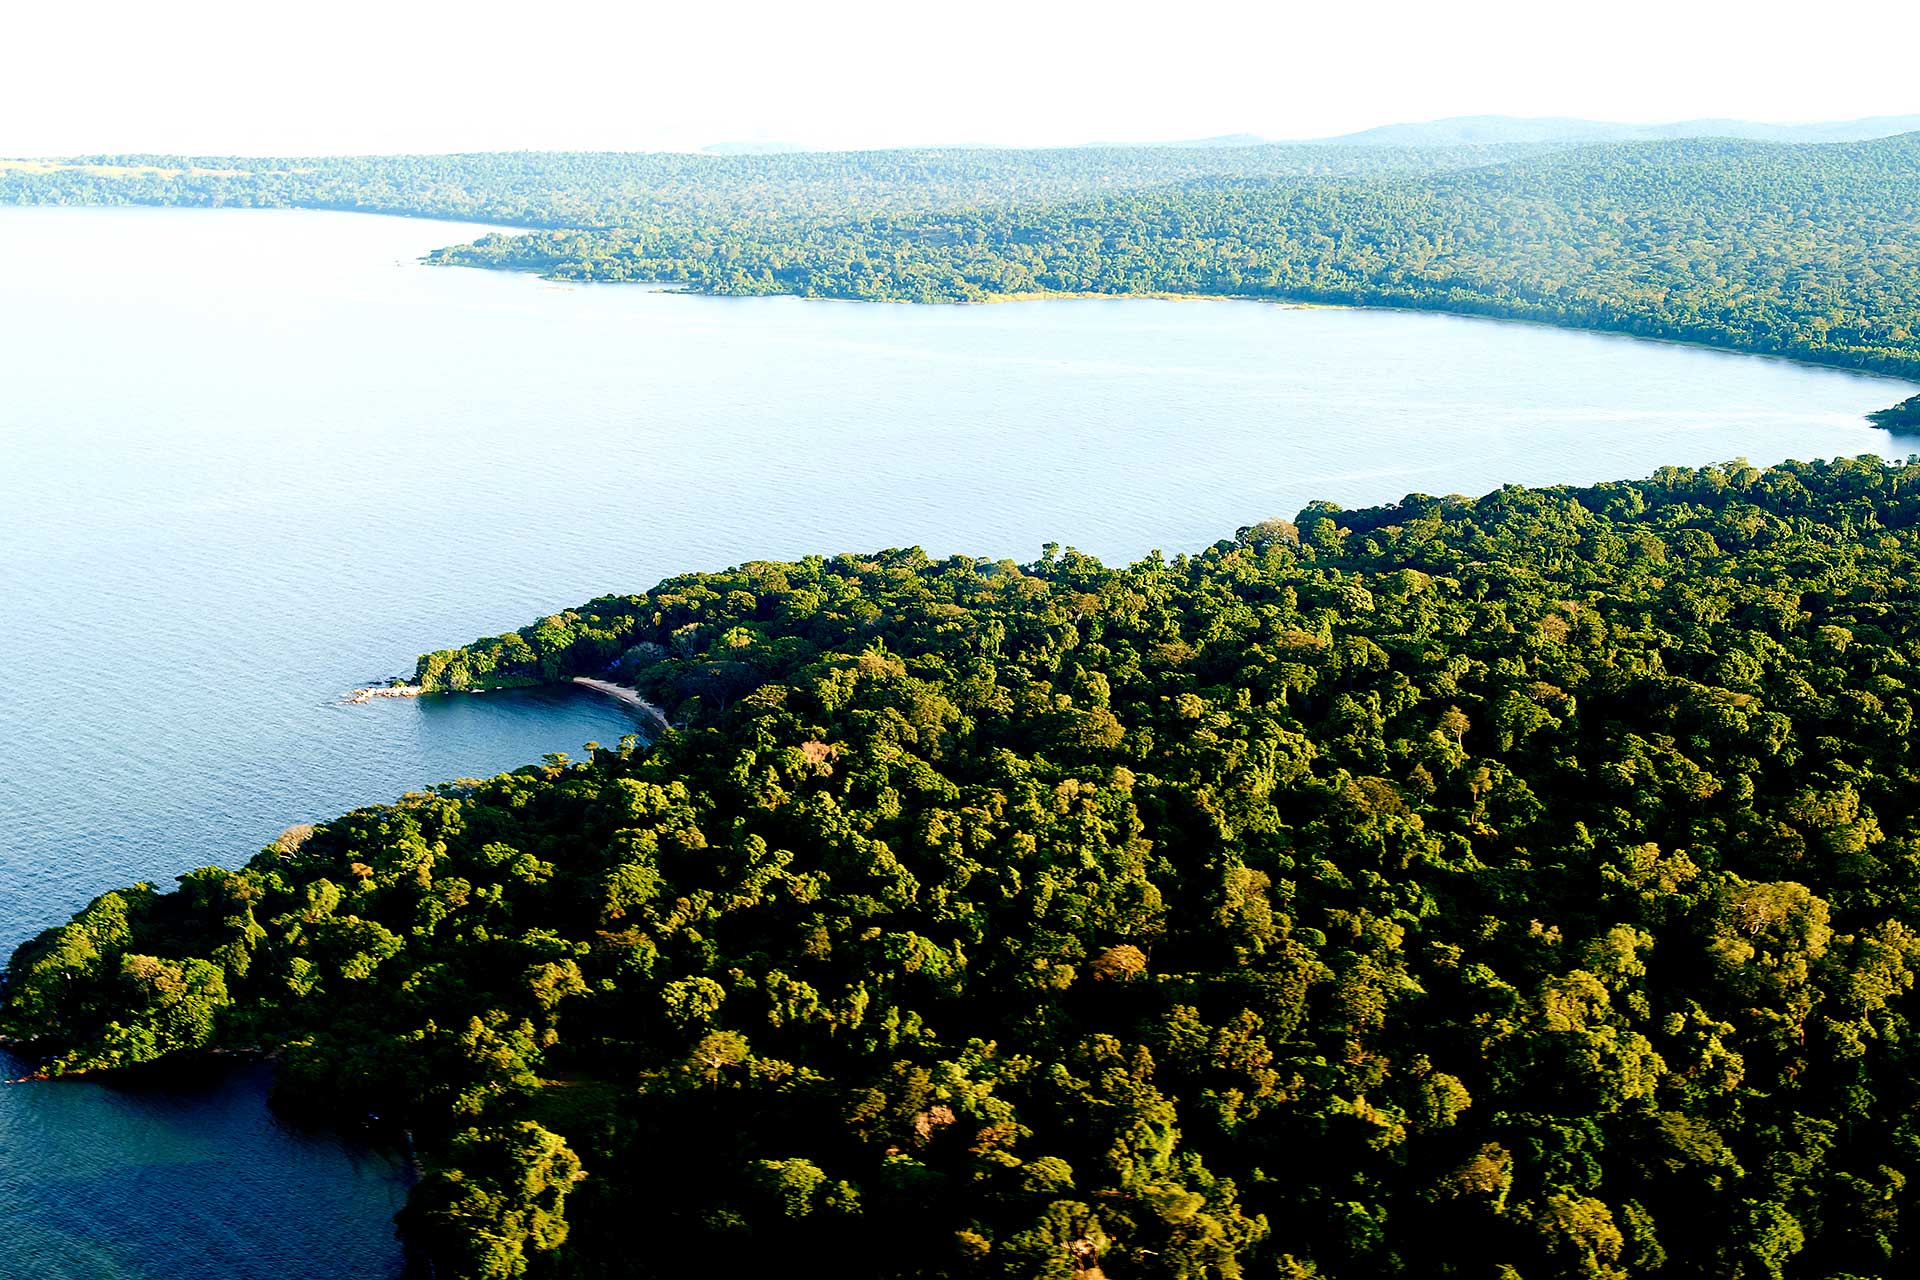 The Islands of Lake Victoria